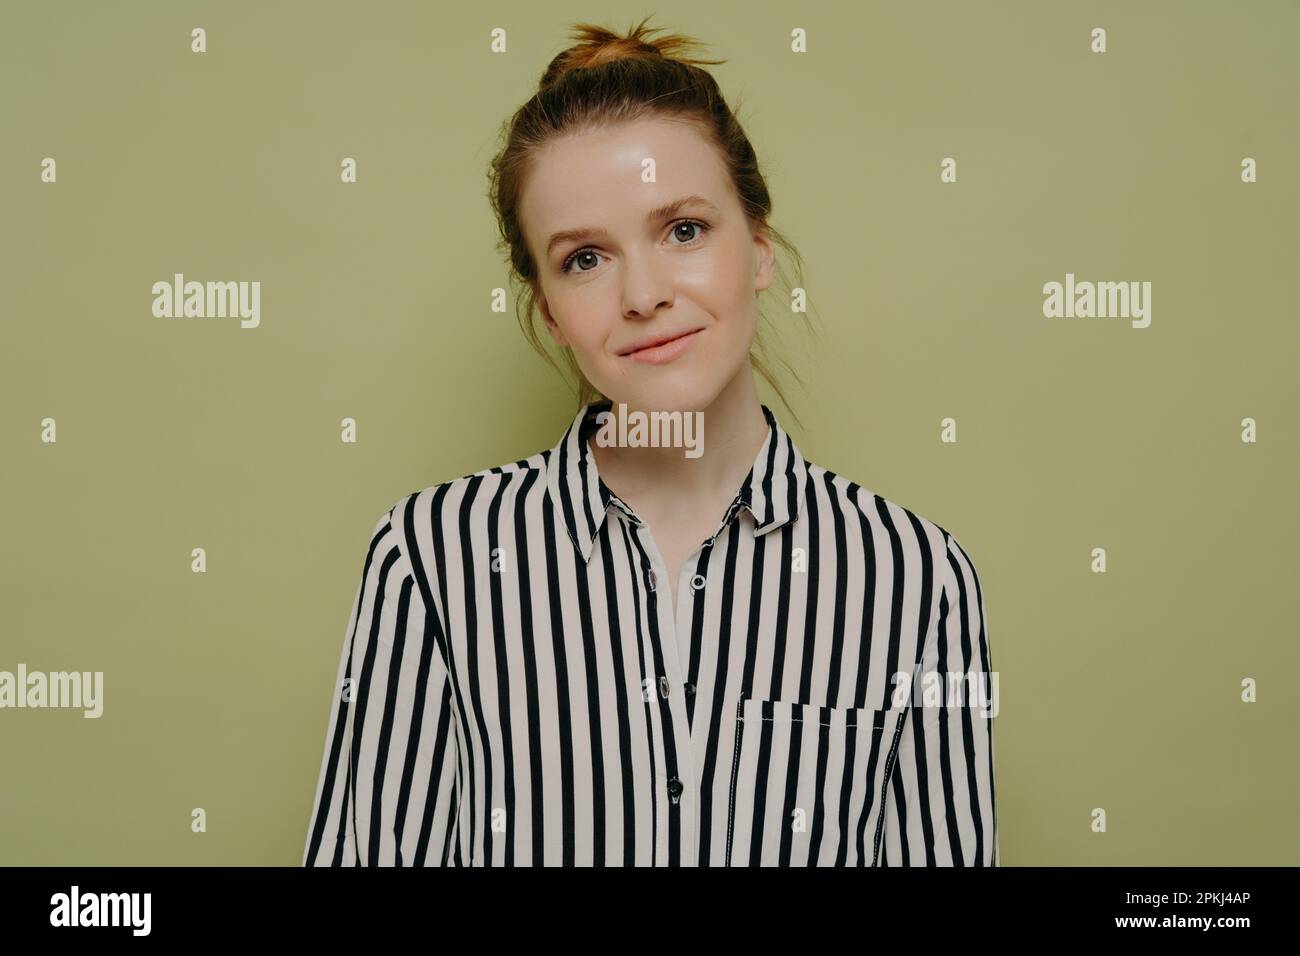 Portrait of calm young european woman with hair in bun wearing black and white striped shirt looking at camera with tilted head and slight smile while Stock Photo